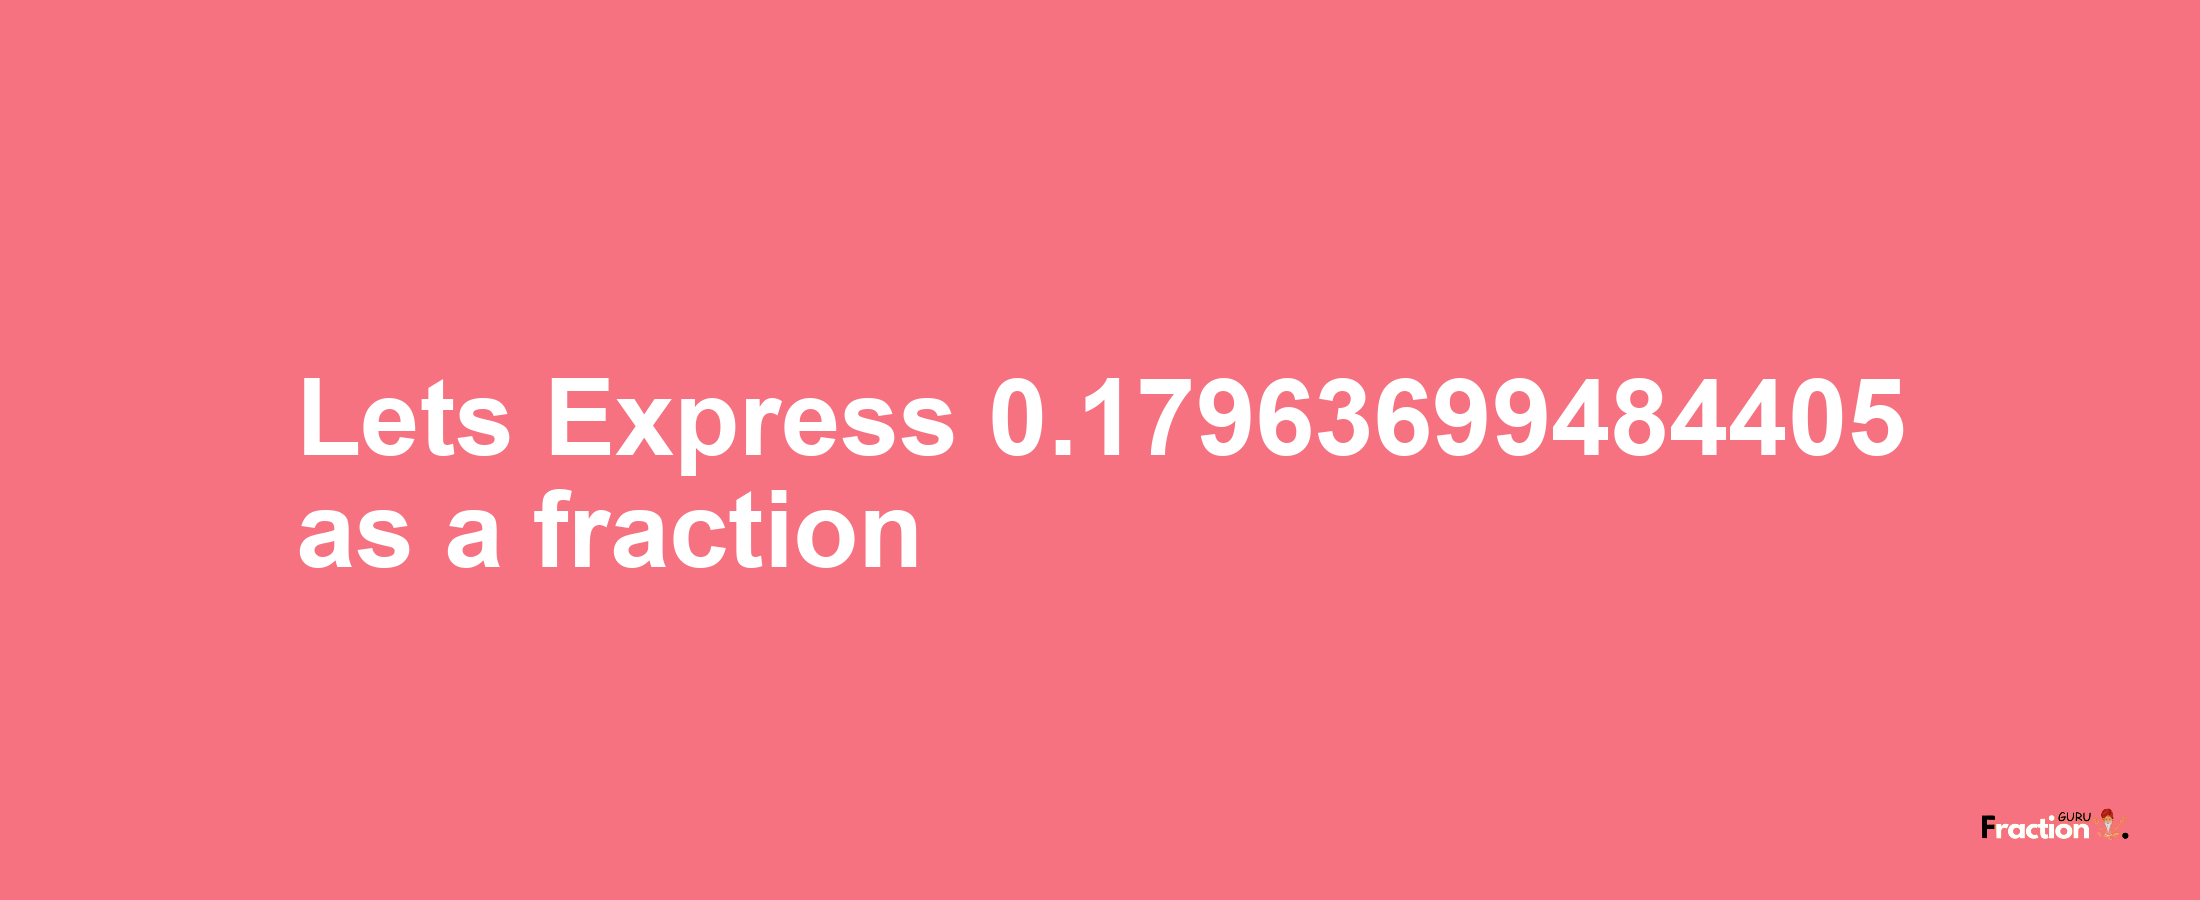 Lets Express 0.17963699484405 as afraction